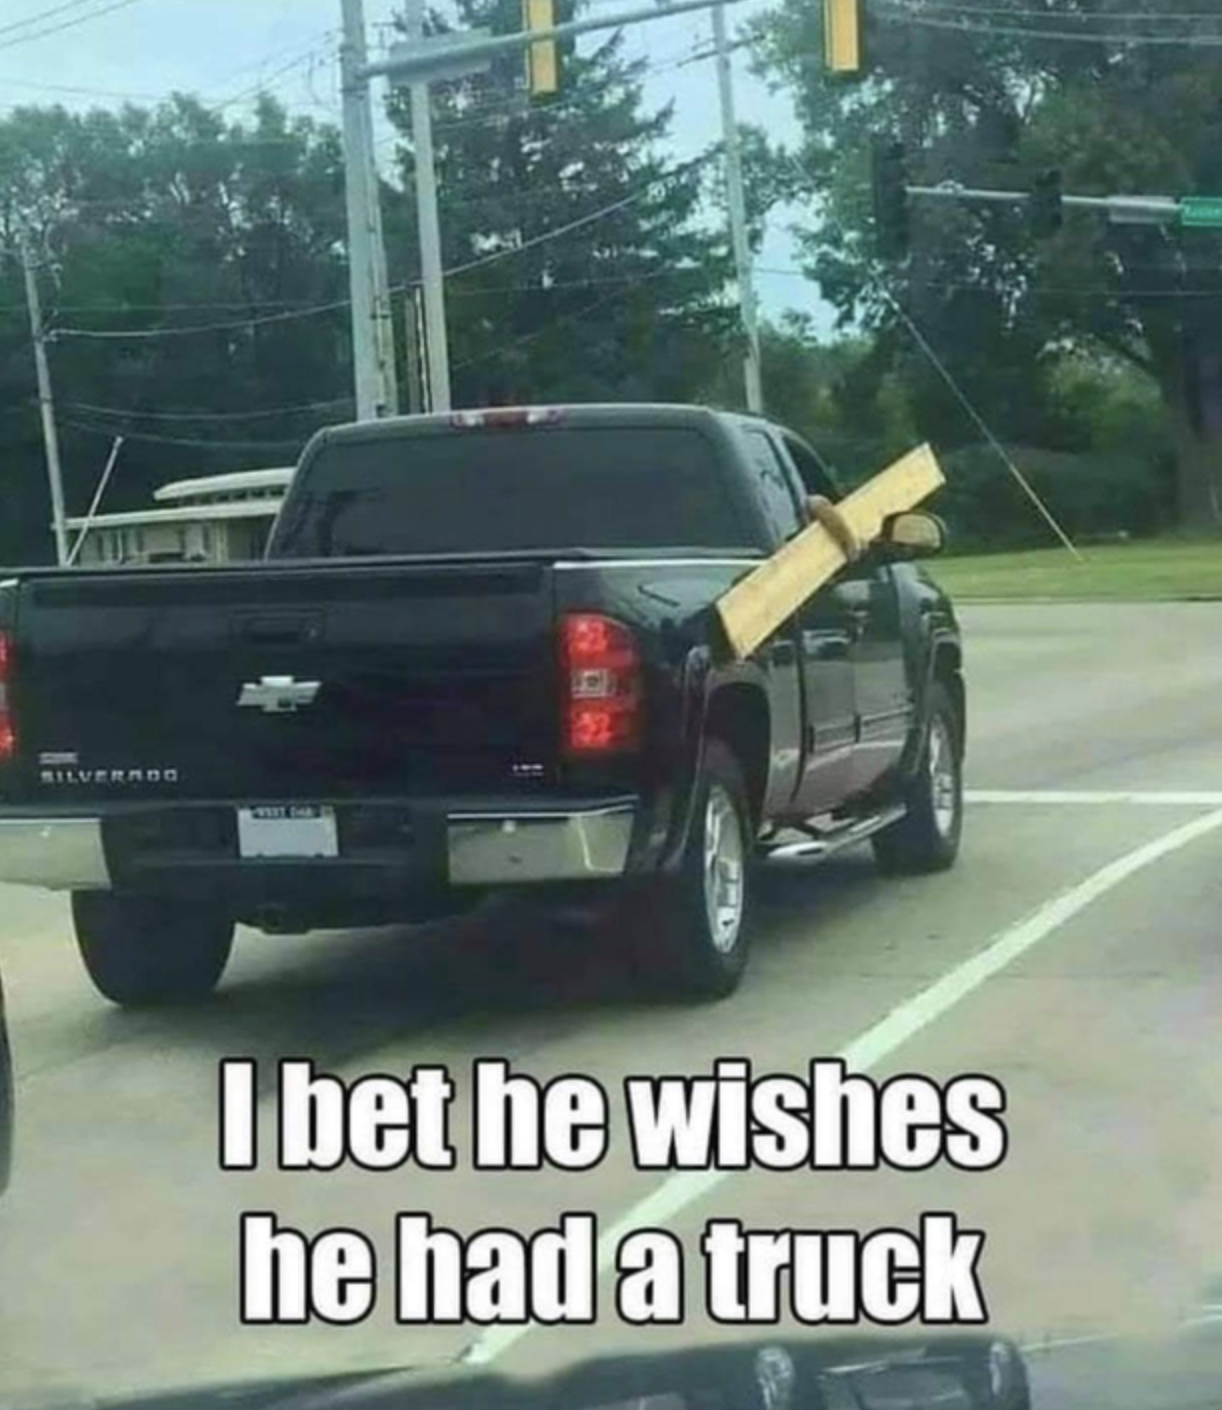 A pickup truck on the highway with a person in the passenger seat holding a plank of wood outside the car